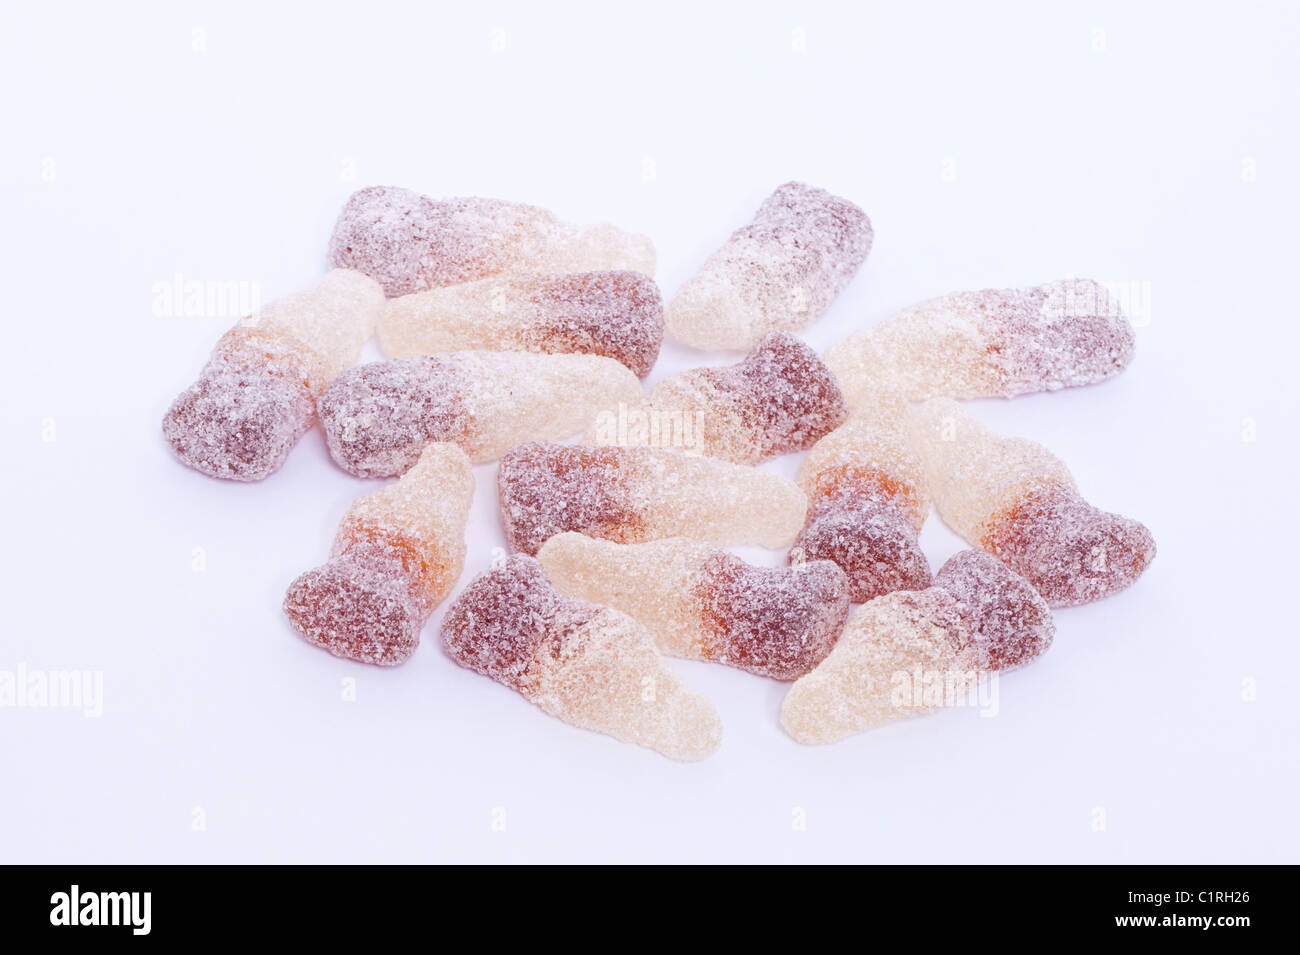 A selection of sugared coke bottles traditional sweets on a white background Stock Photo